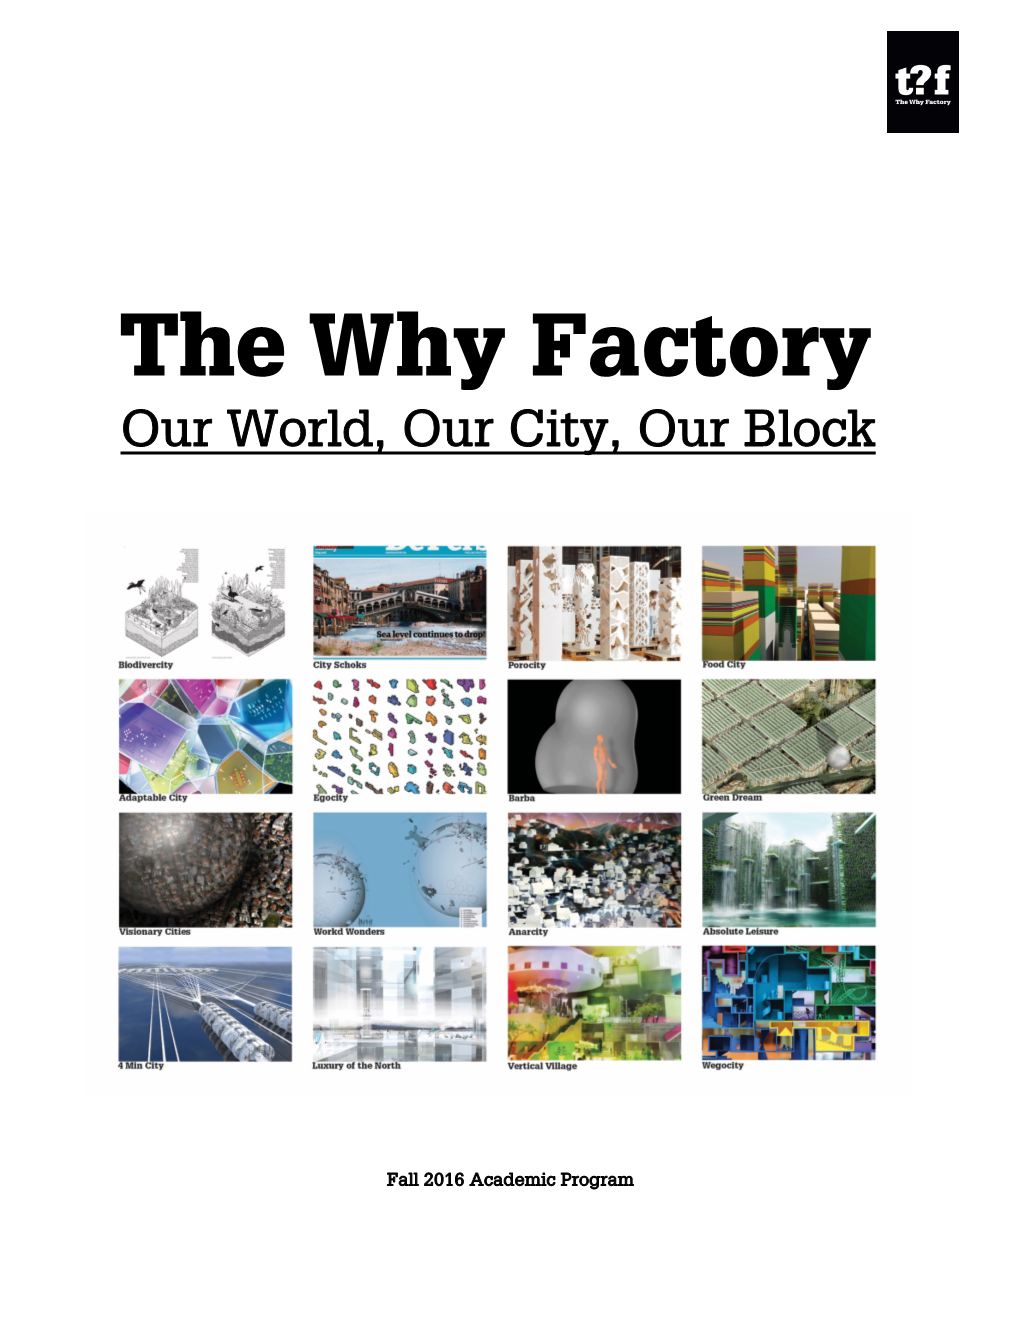 The Why Factory Our World, Our City, Our Block